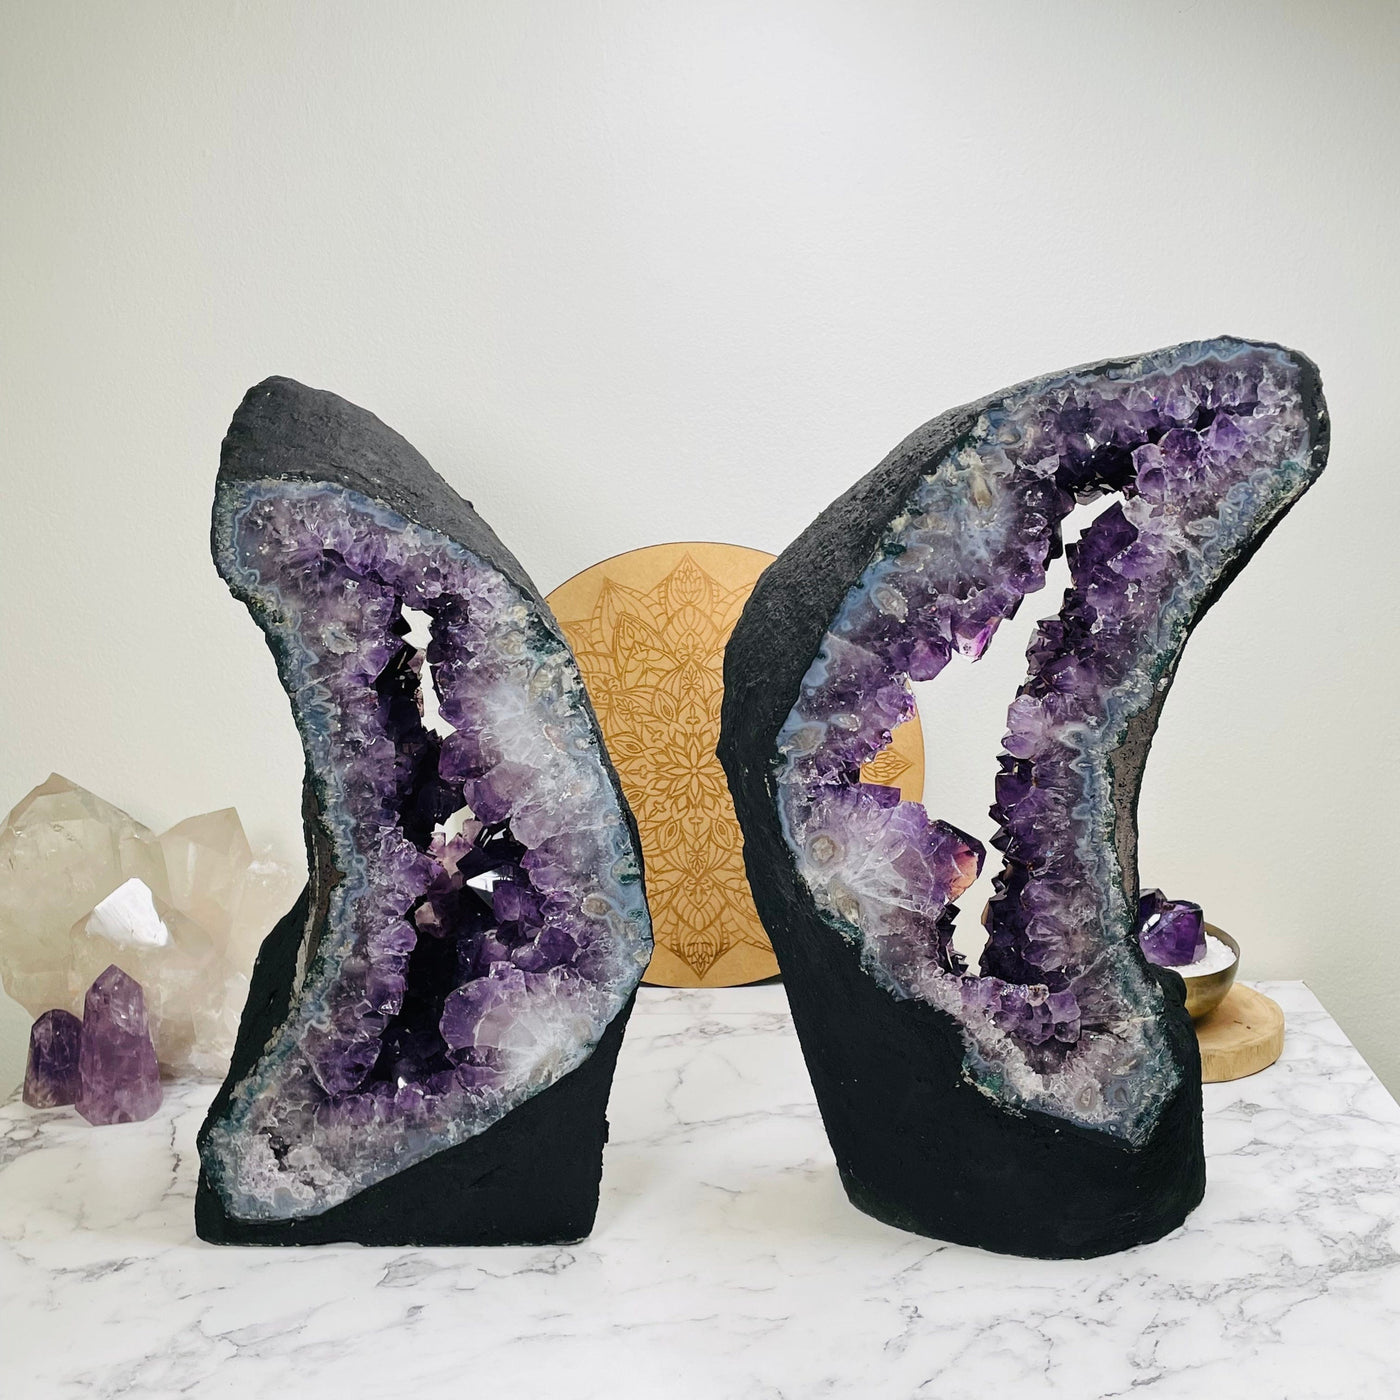 amethyst portals shaped as moon crescents displayed as home decor 